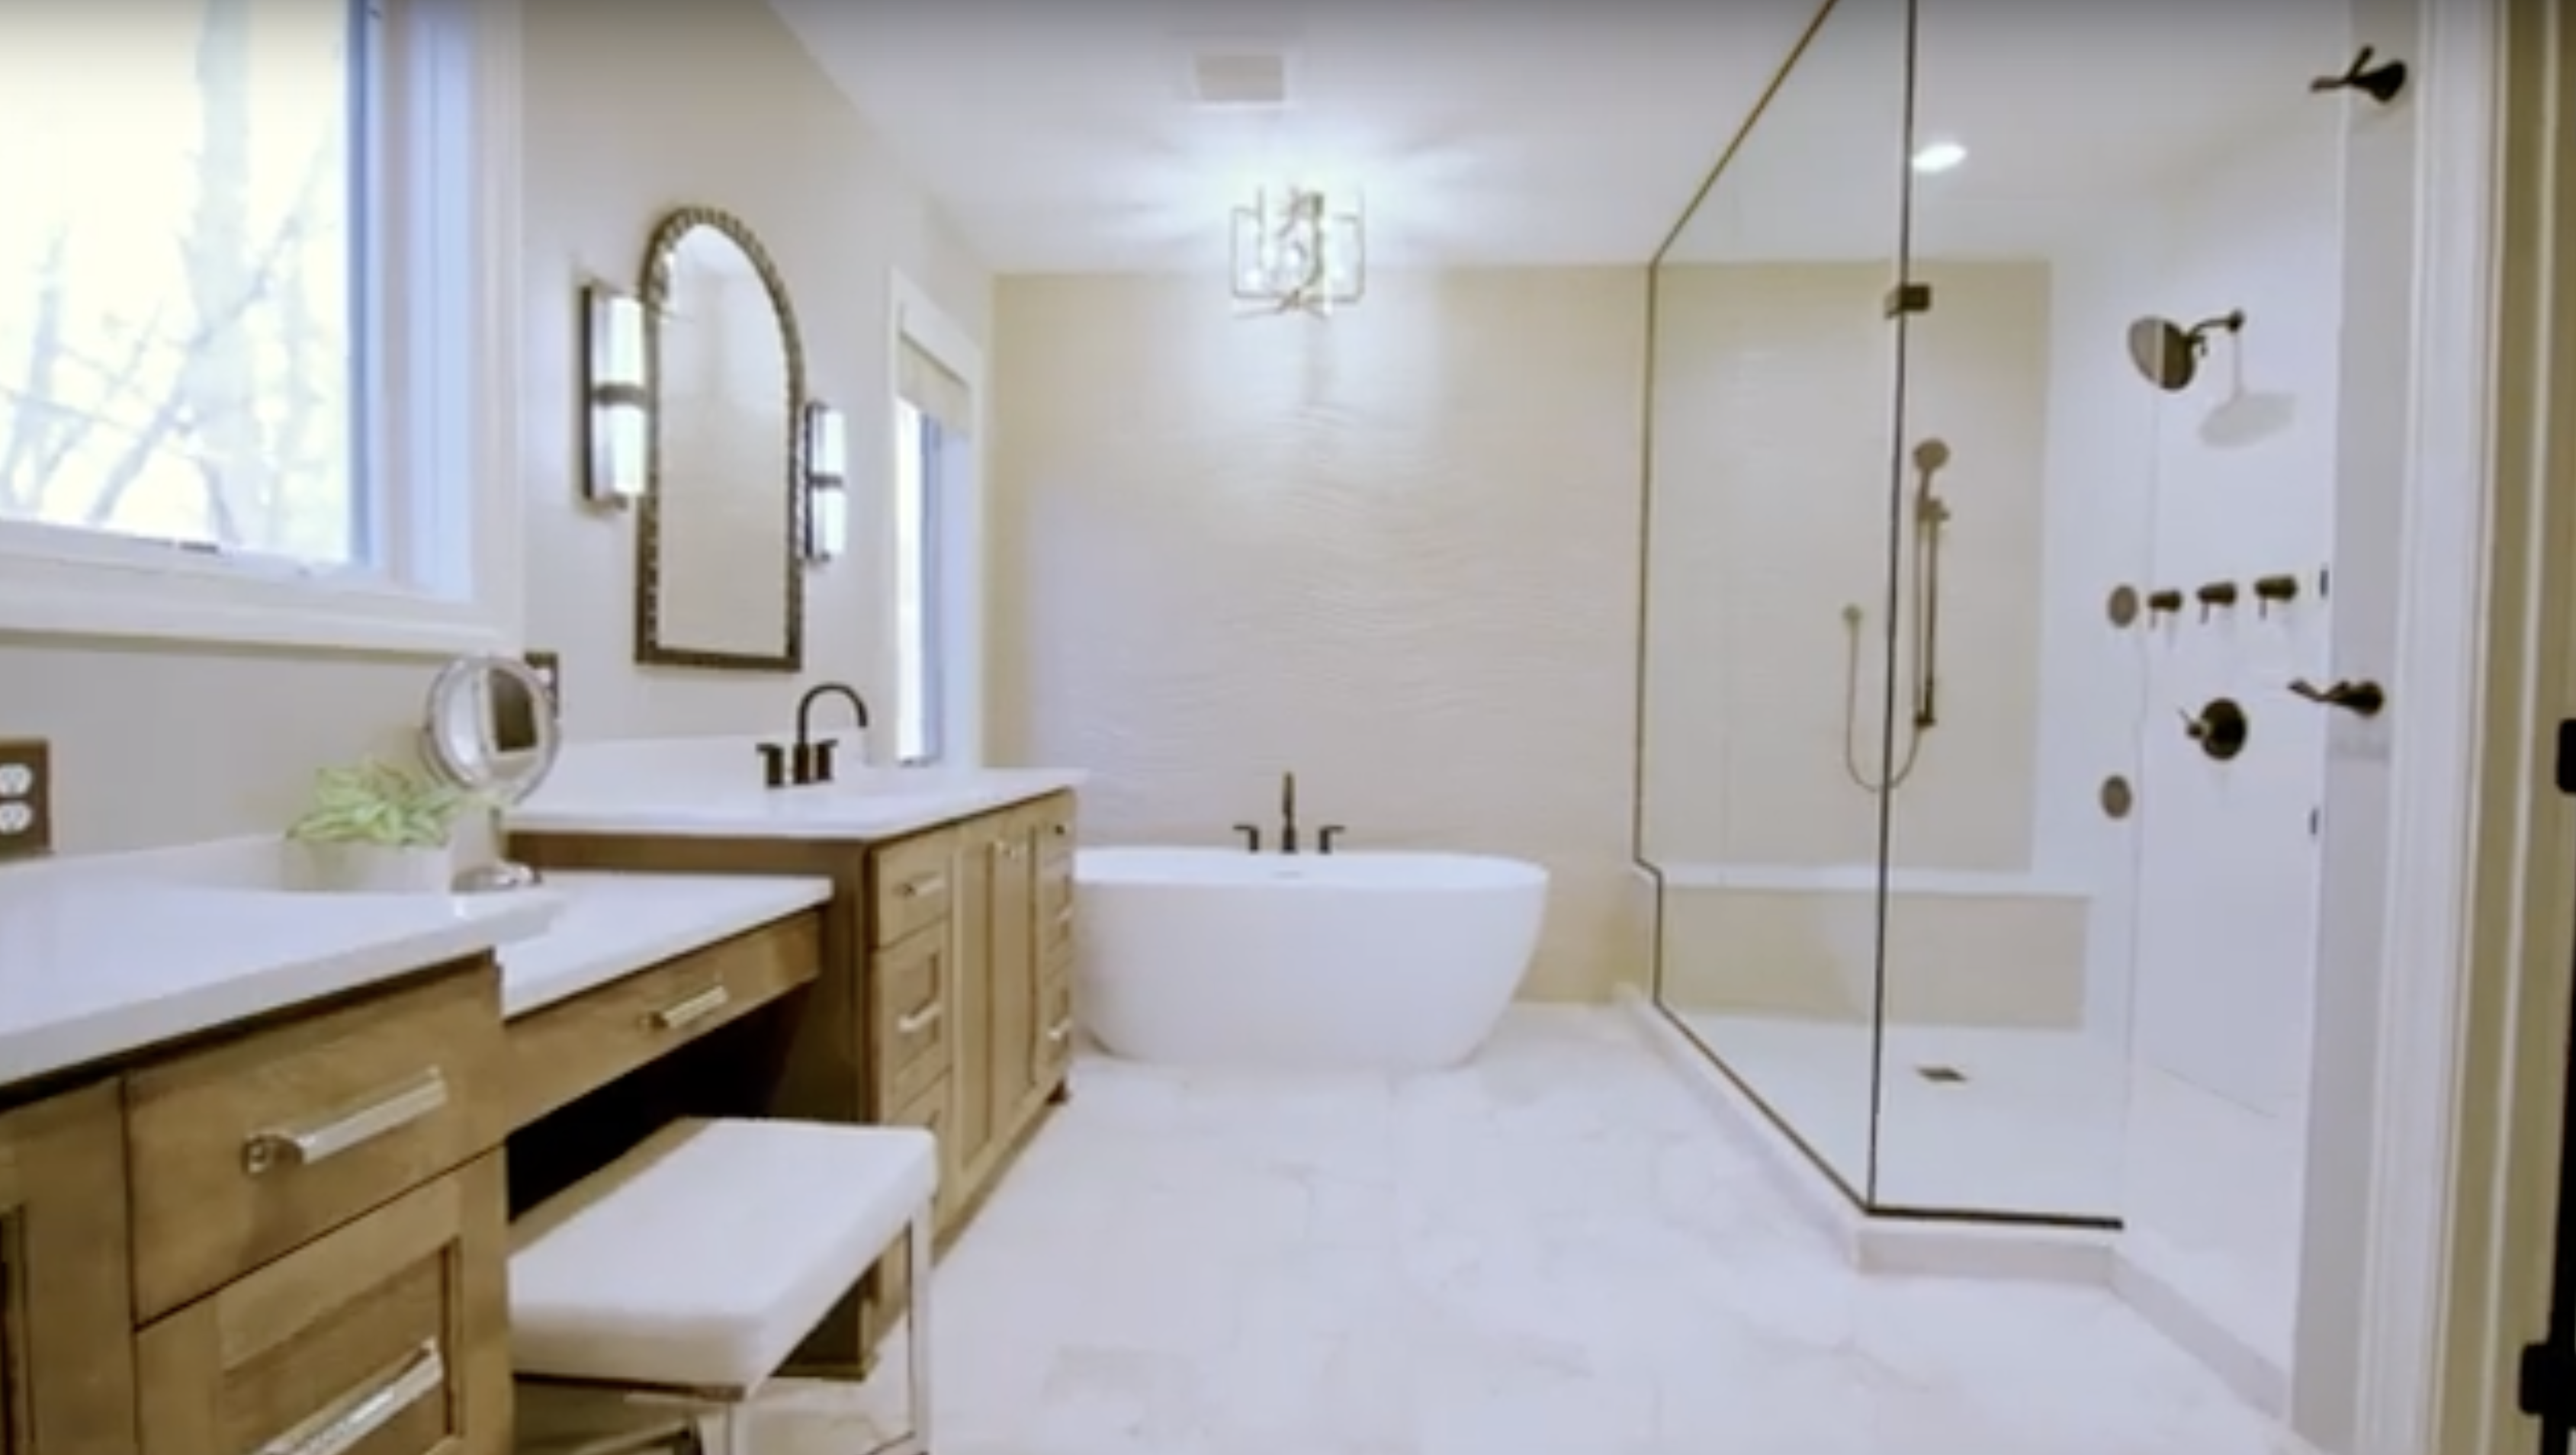 Modern Edina remodel bathroom with dual vanity, freestanding tub, and glass-enclosed shower.